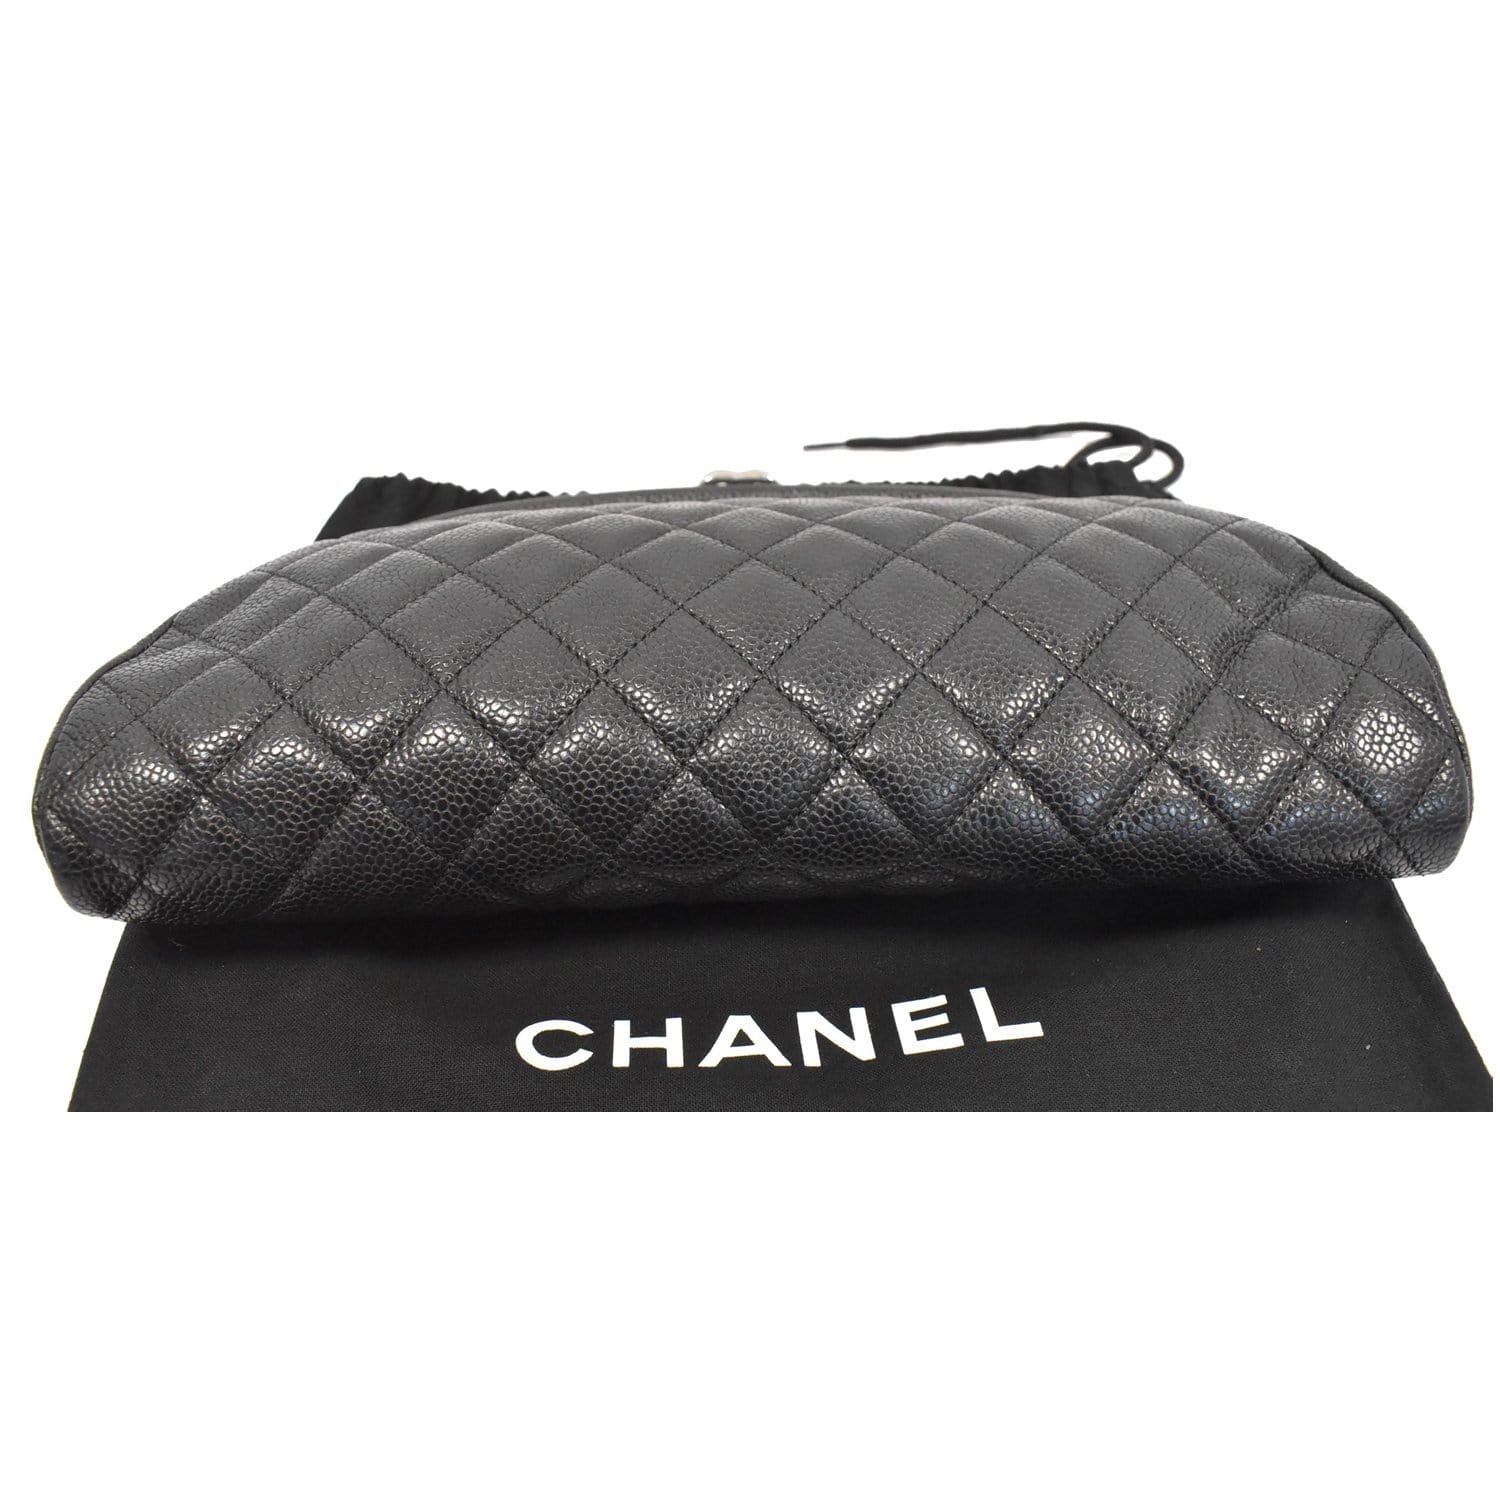 Timeless/classique leather handbag Chanel Black in Leather - 38990001